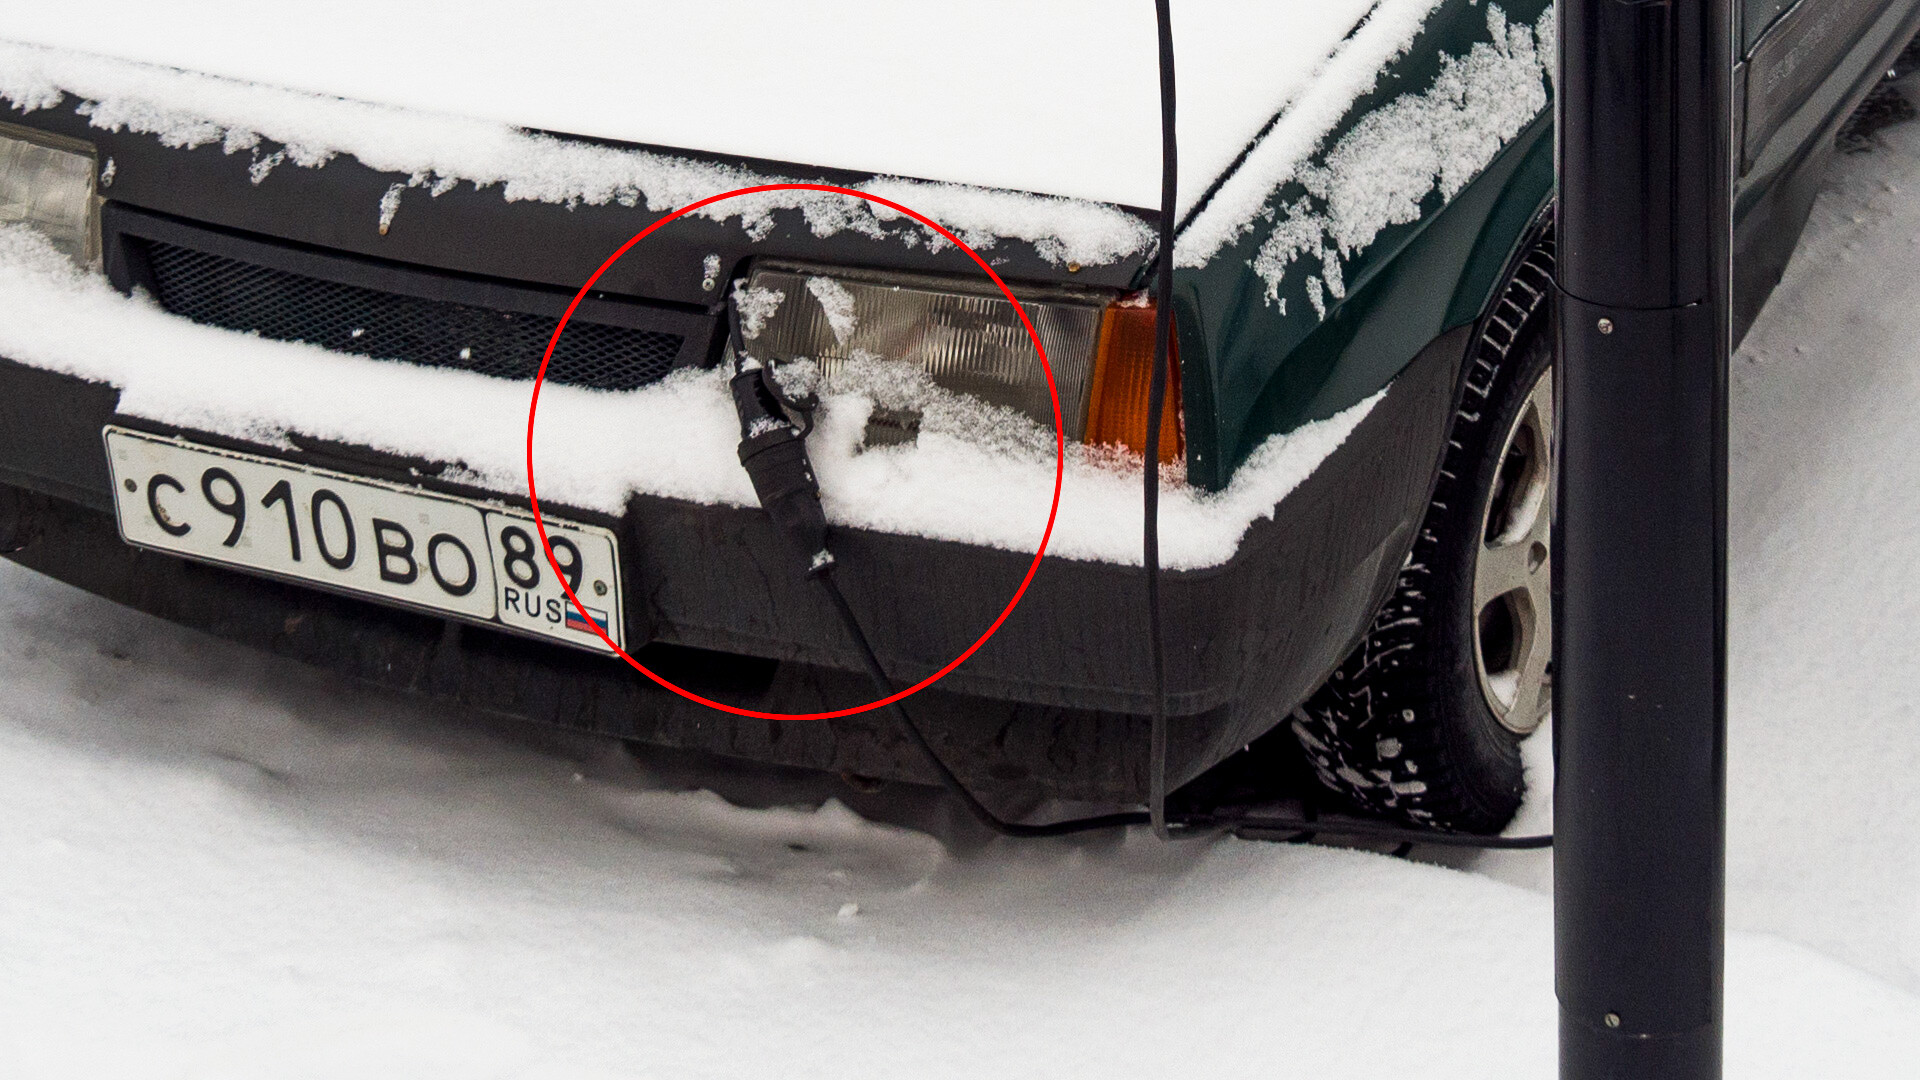  We spotted this car in Labytnangi, Yamal.